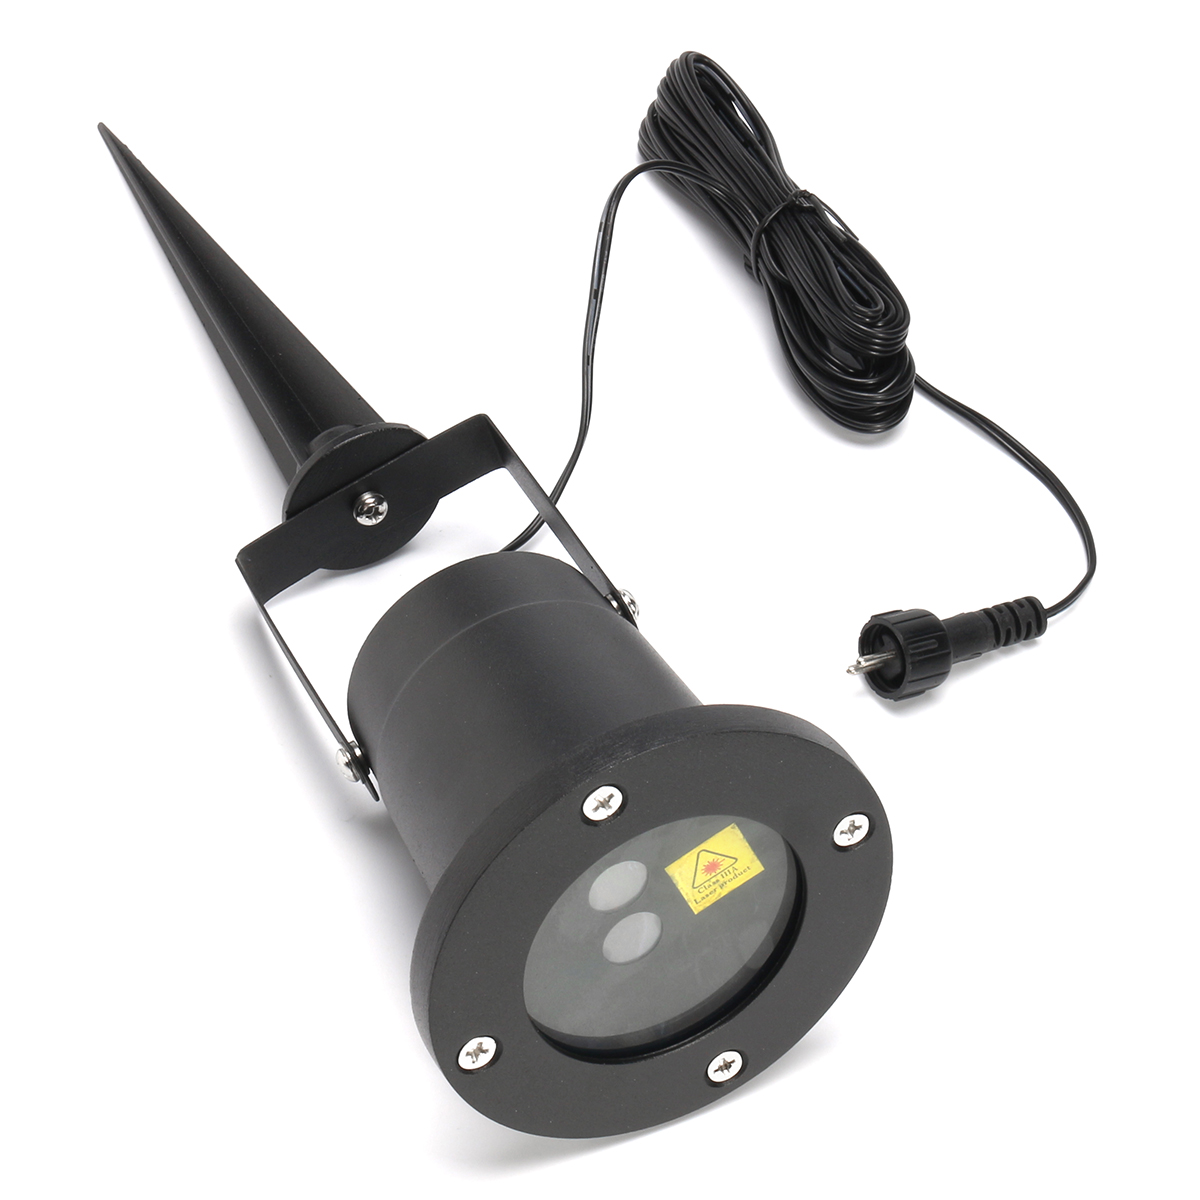 Christmas-Star-Projector-Stage-Light-Waterproof-RG-LED-Remote-Control-Outdoor-Landscape-Lamp-Christm-1345110-6